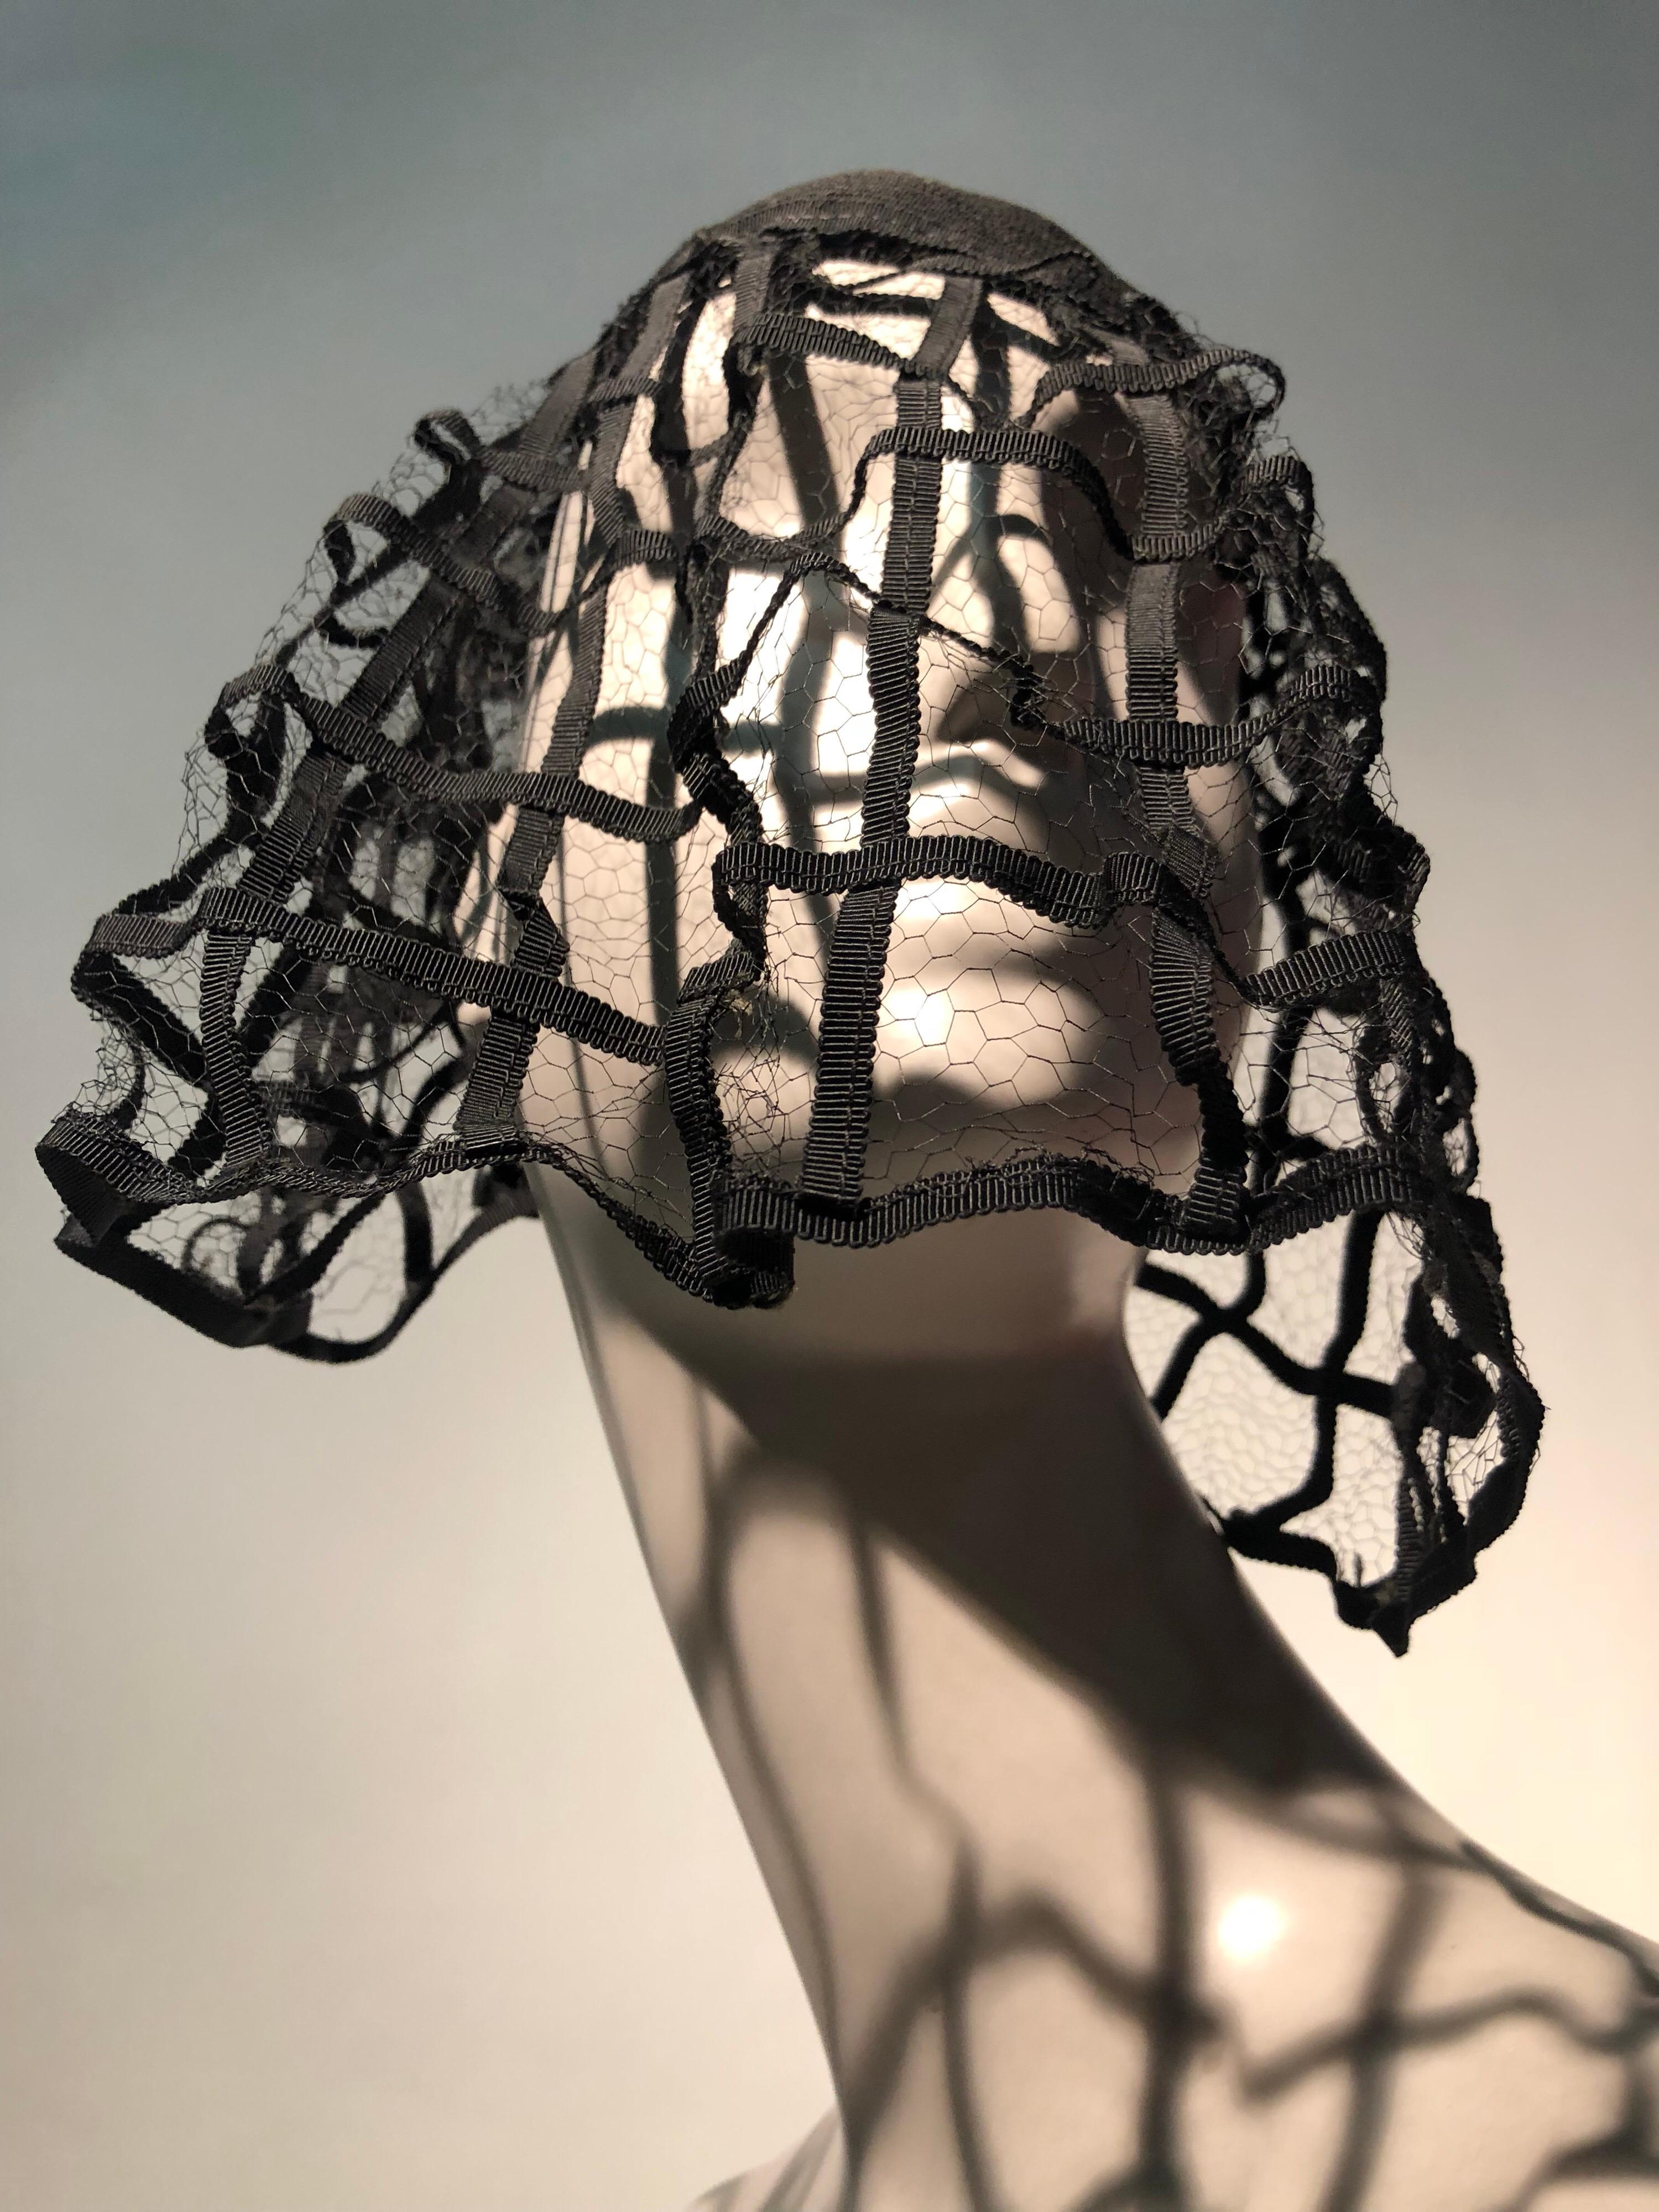 A fabulous, never worn 1940s Hattie Carnegie black hat: made completely of grosgrain ribbon sewn in concentric circles and veiling. The veil is quite interesting and dramatic: A ribbon cage with lighter black veil behind it.  Stunning!  Vintage